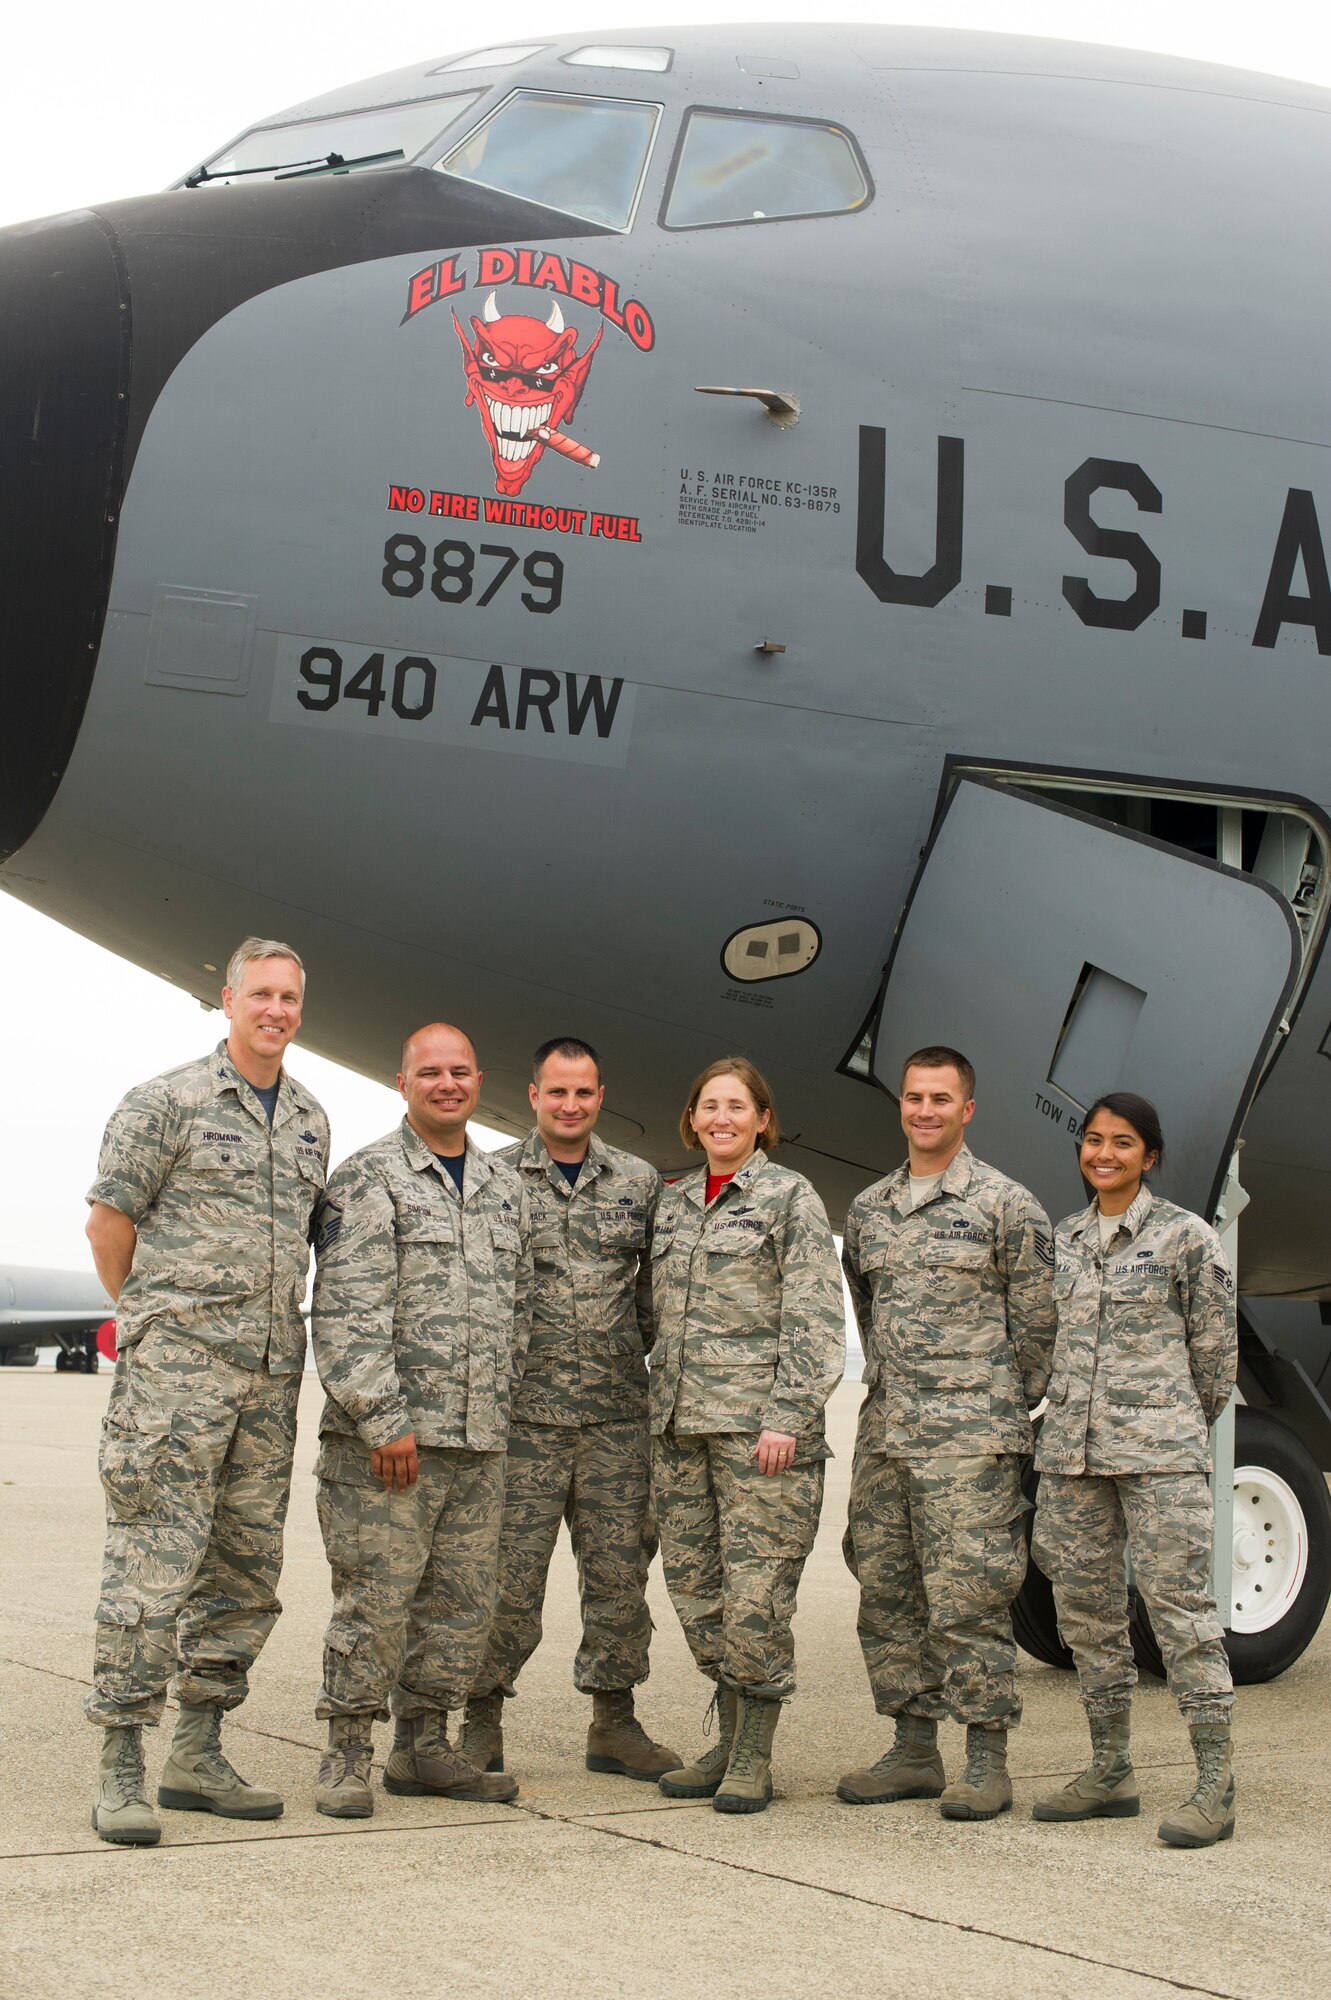 The maintenance crew of the “El Diablo” KC-135 Stratotanker stand with the 940th Air Refueling Wing commander and vice commander on the flightline after revealing the aircraft’s nose art May 5 at Beale Air Force Base, California.